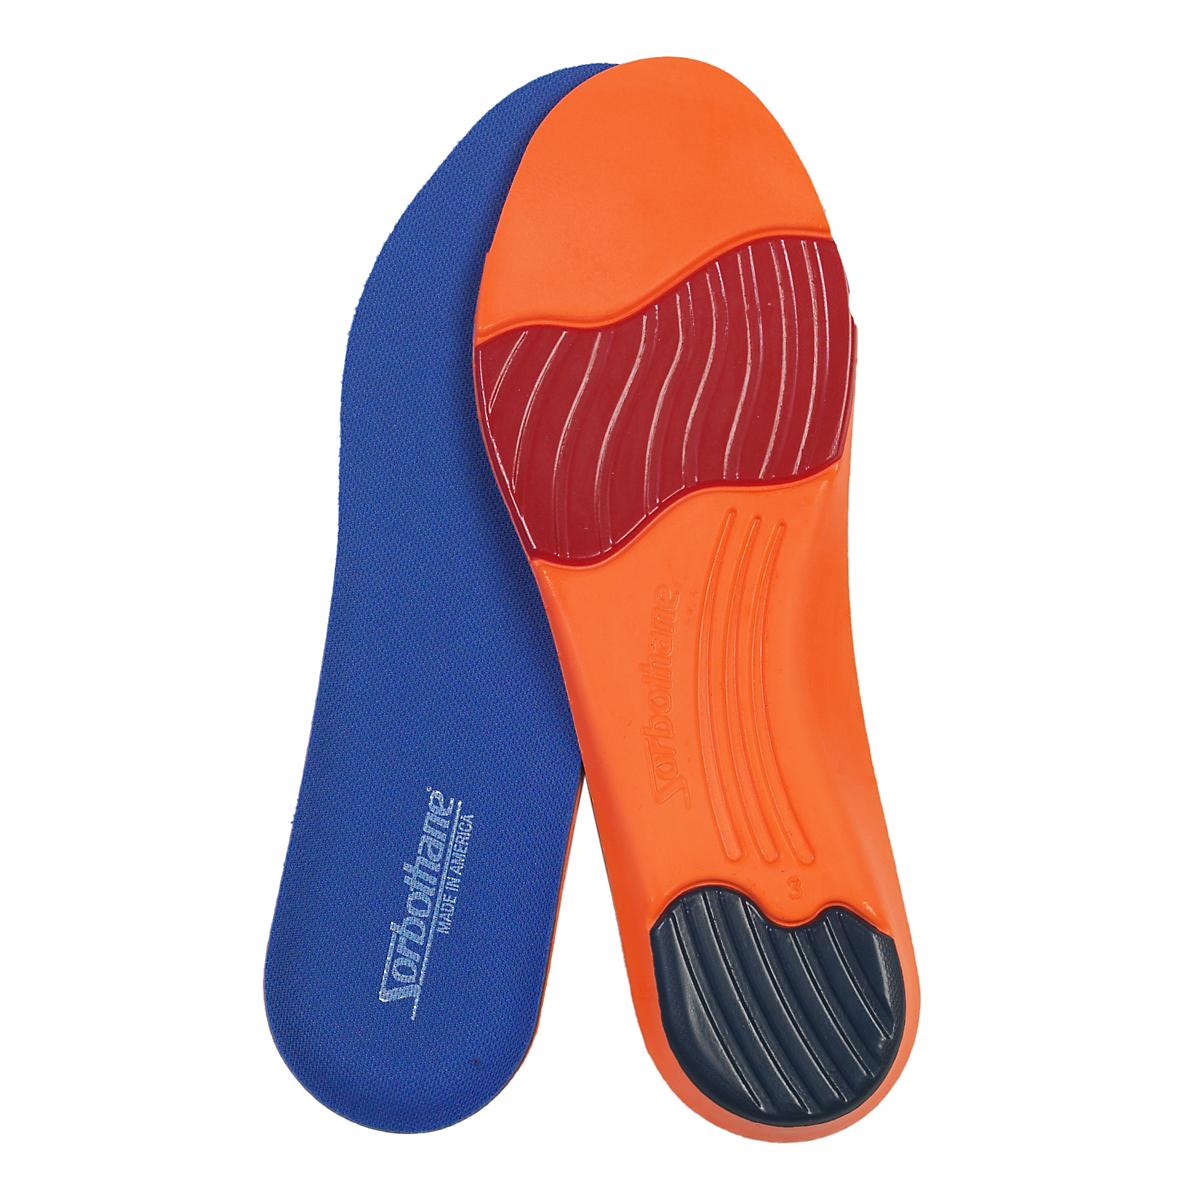 Sorbothane Ultra Sole Insoles at Road Runner Sports